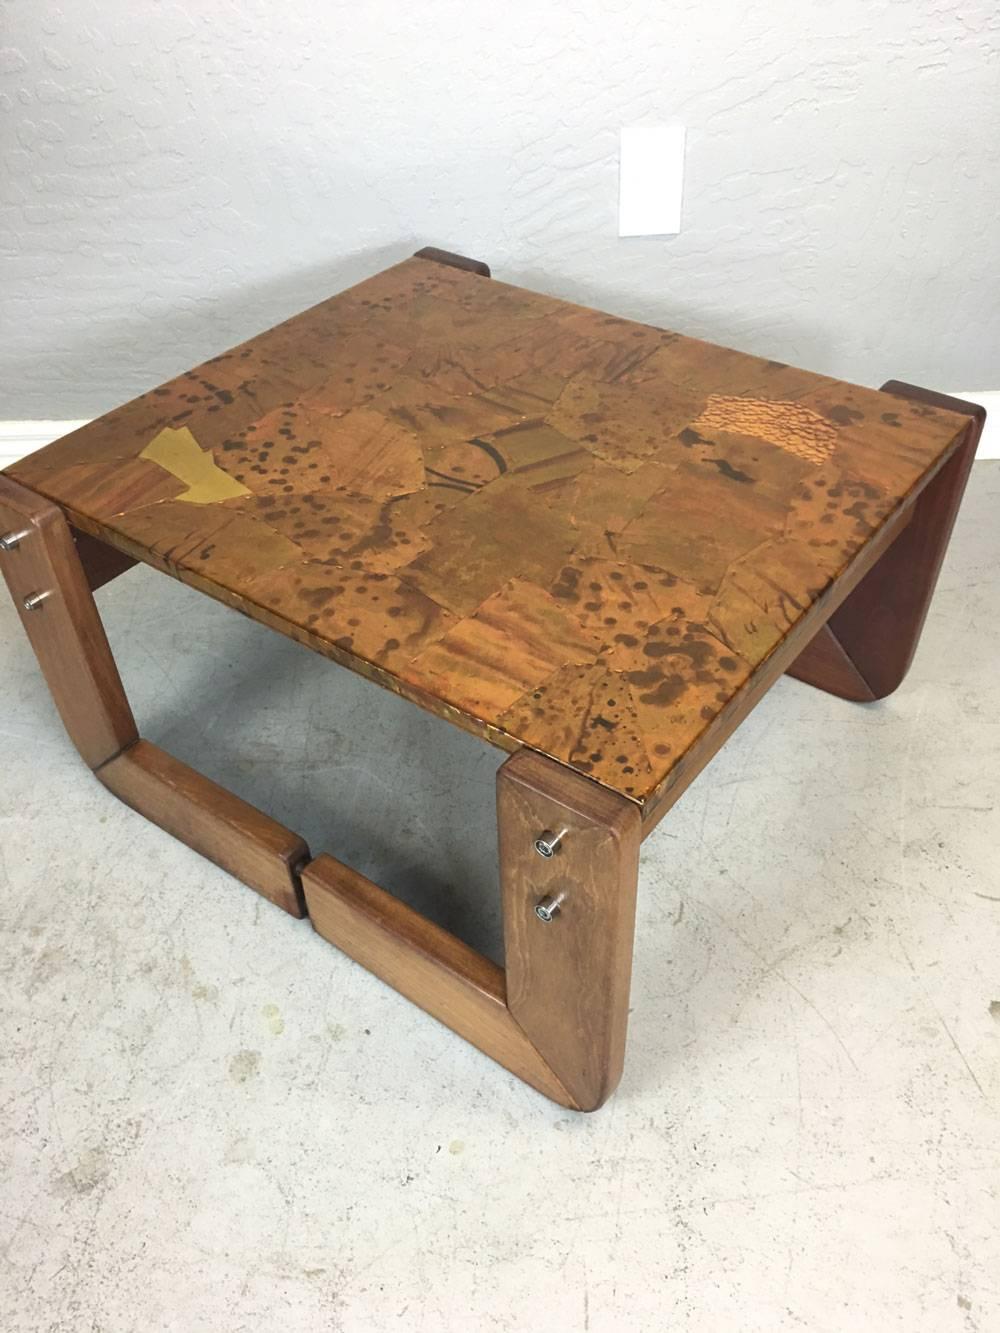 Percival Lafer hand-hammered copper and bronze side table with a rosewood frame. Original stain. They are cleverly designed so that steel braces can be unlocked for easier transport.